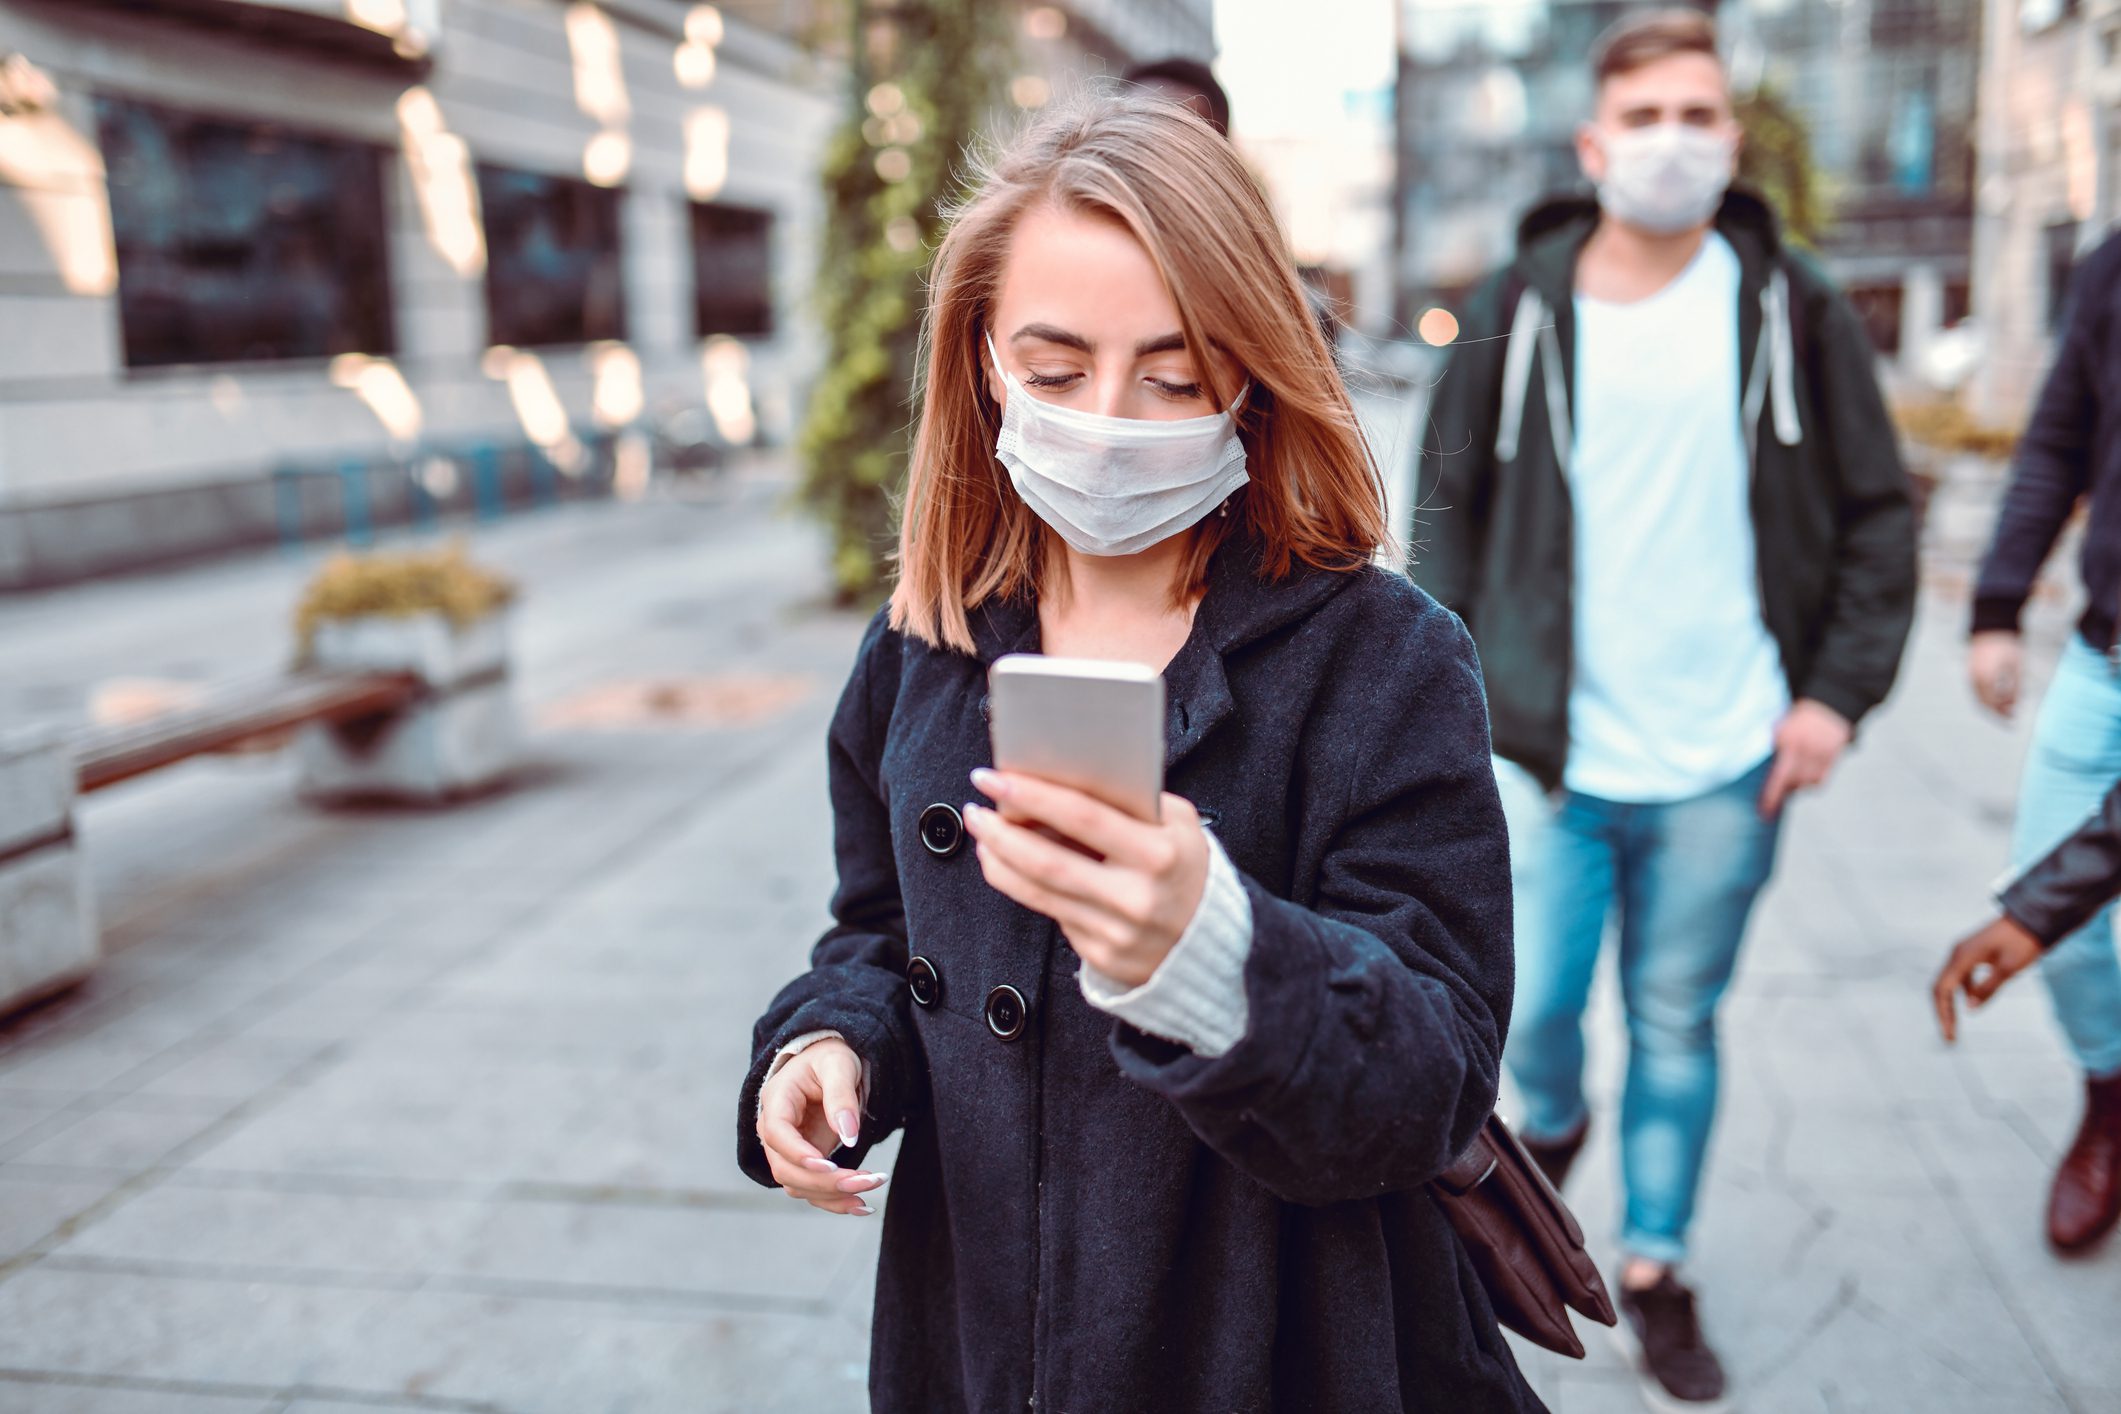 Female Using Smartphone Among Many People Walking With Face Masks Through City